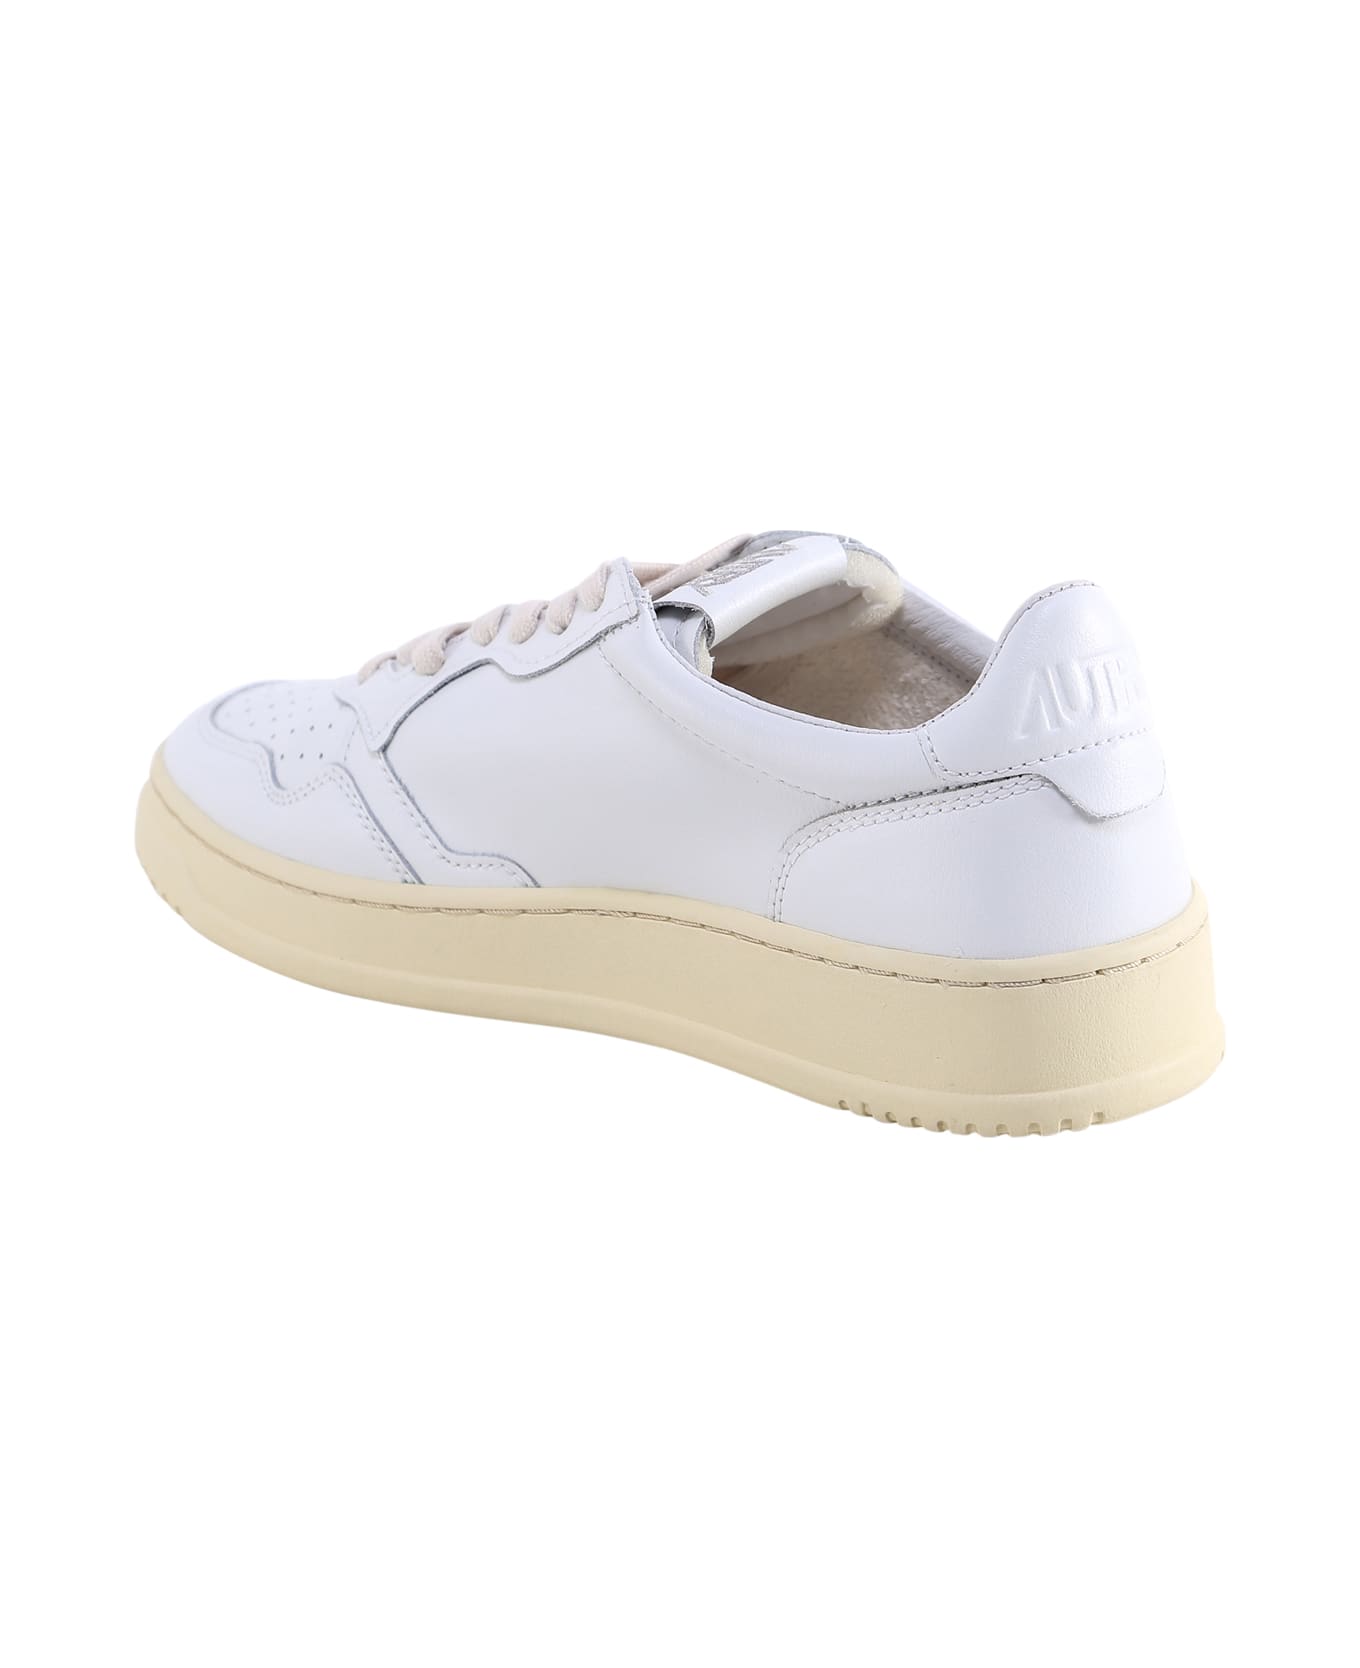 Autry Medalist Sneakers - White スニーカー